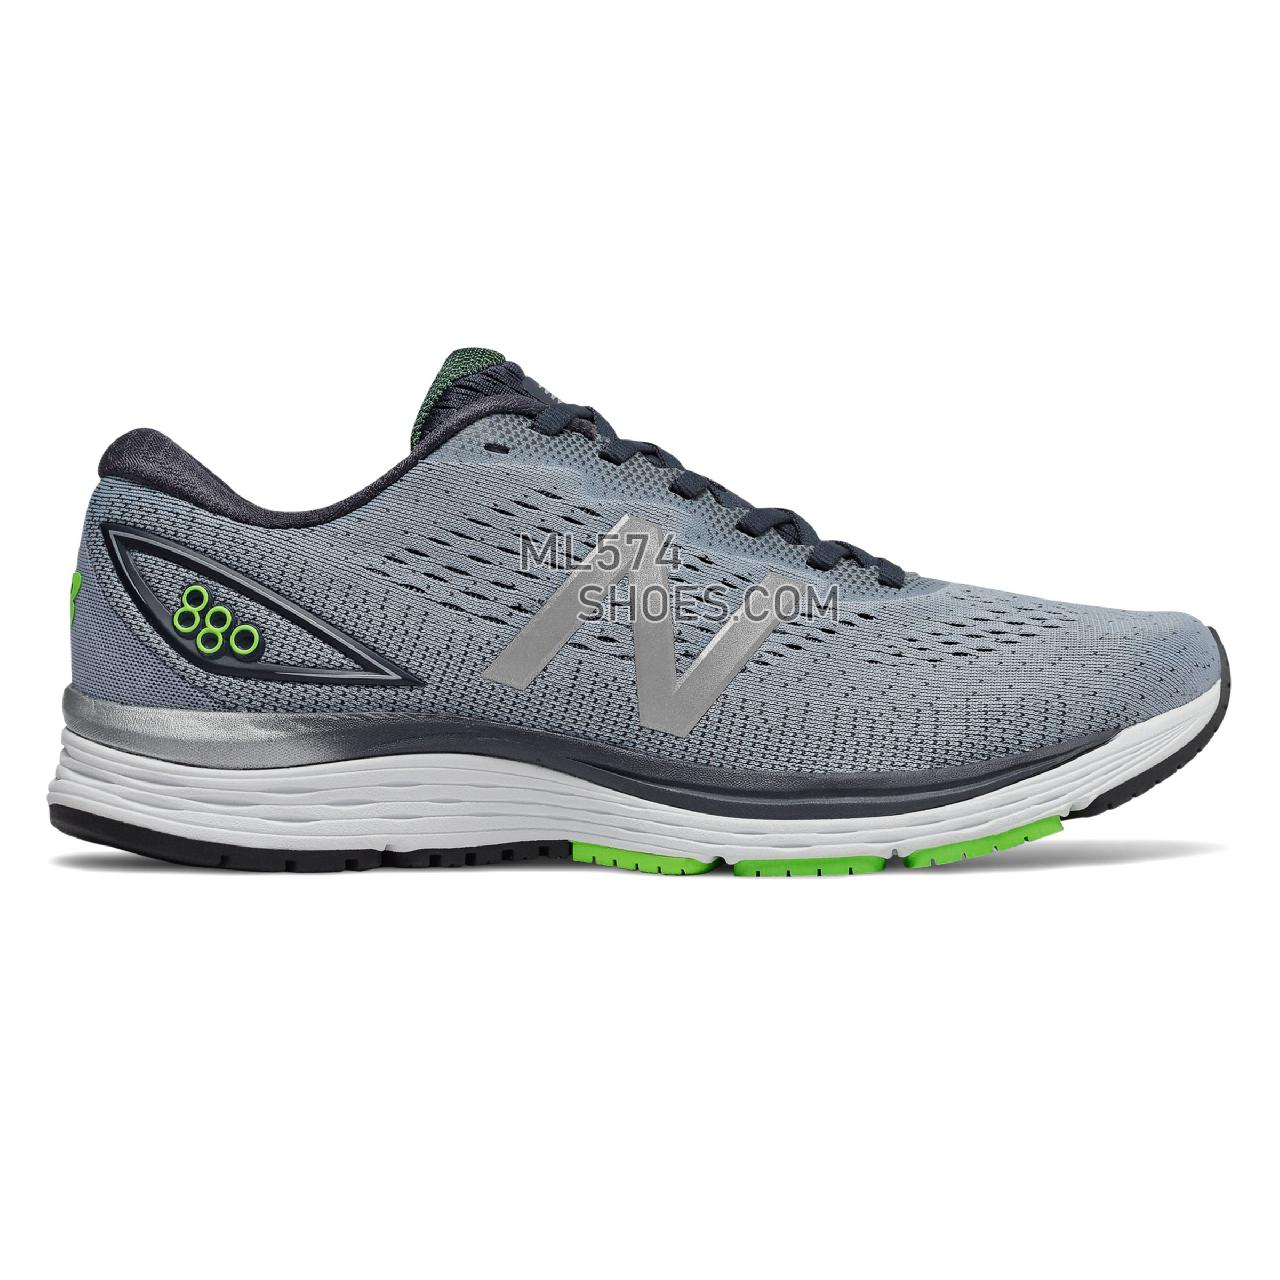 New Balance 880v9 - Men's Neutral Running - Reflection with Outerspace and RGB Green - M880GB9